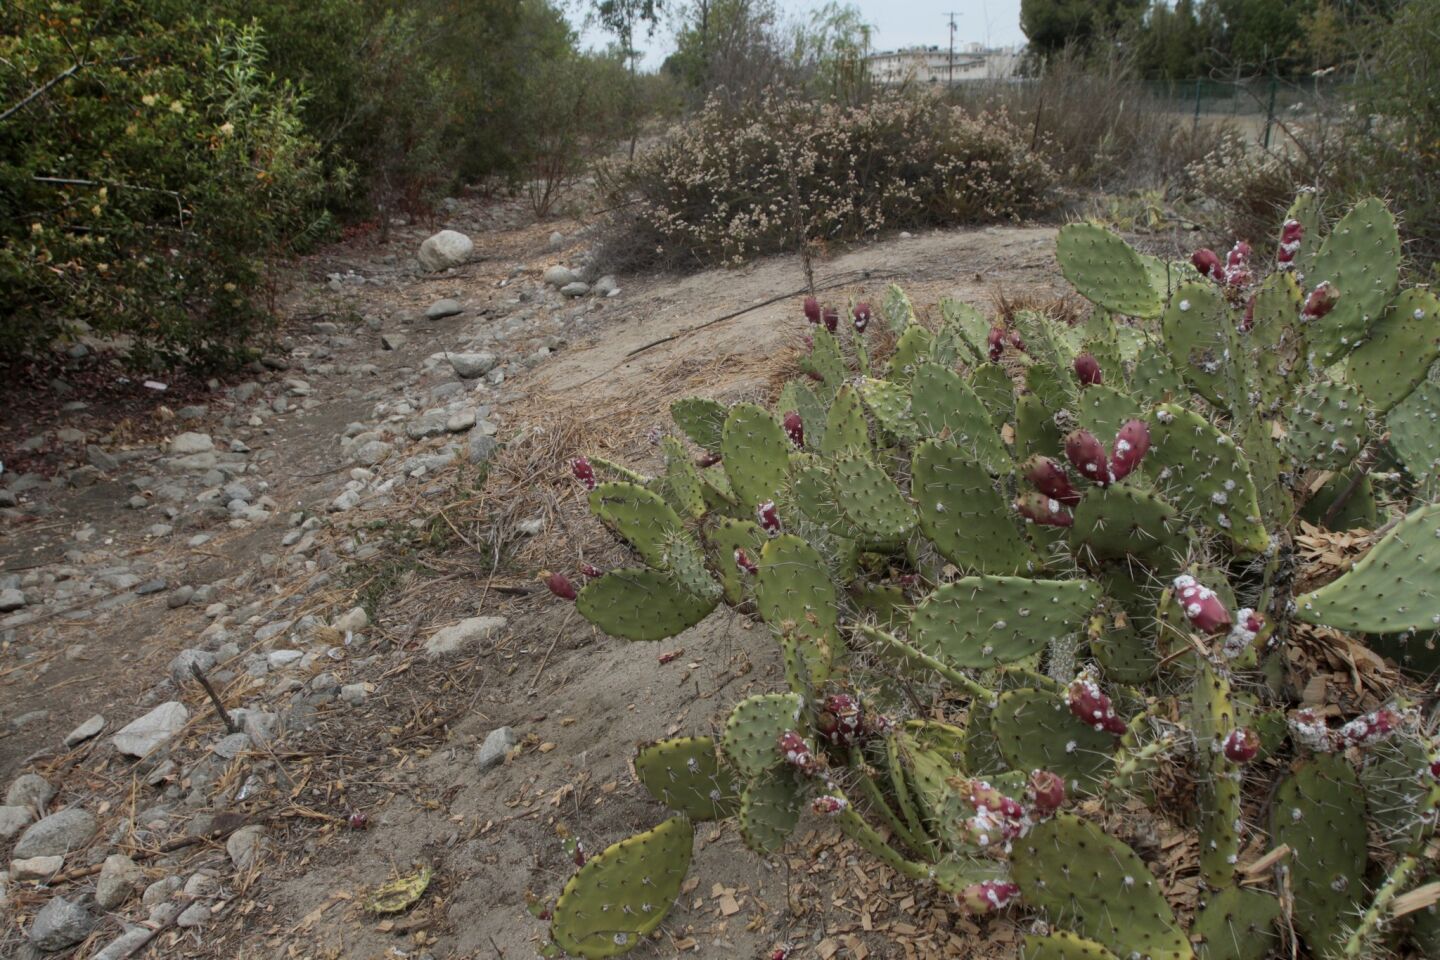 The dry streambed to the left of the channel is dotted with native -- and drought-tolerant -- plants, including cactus.